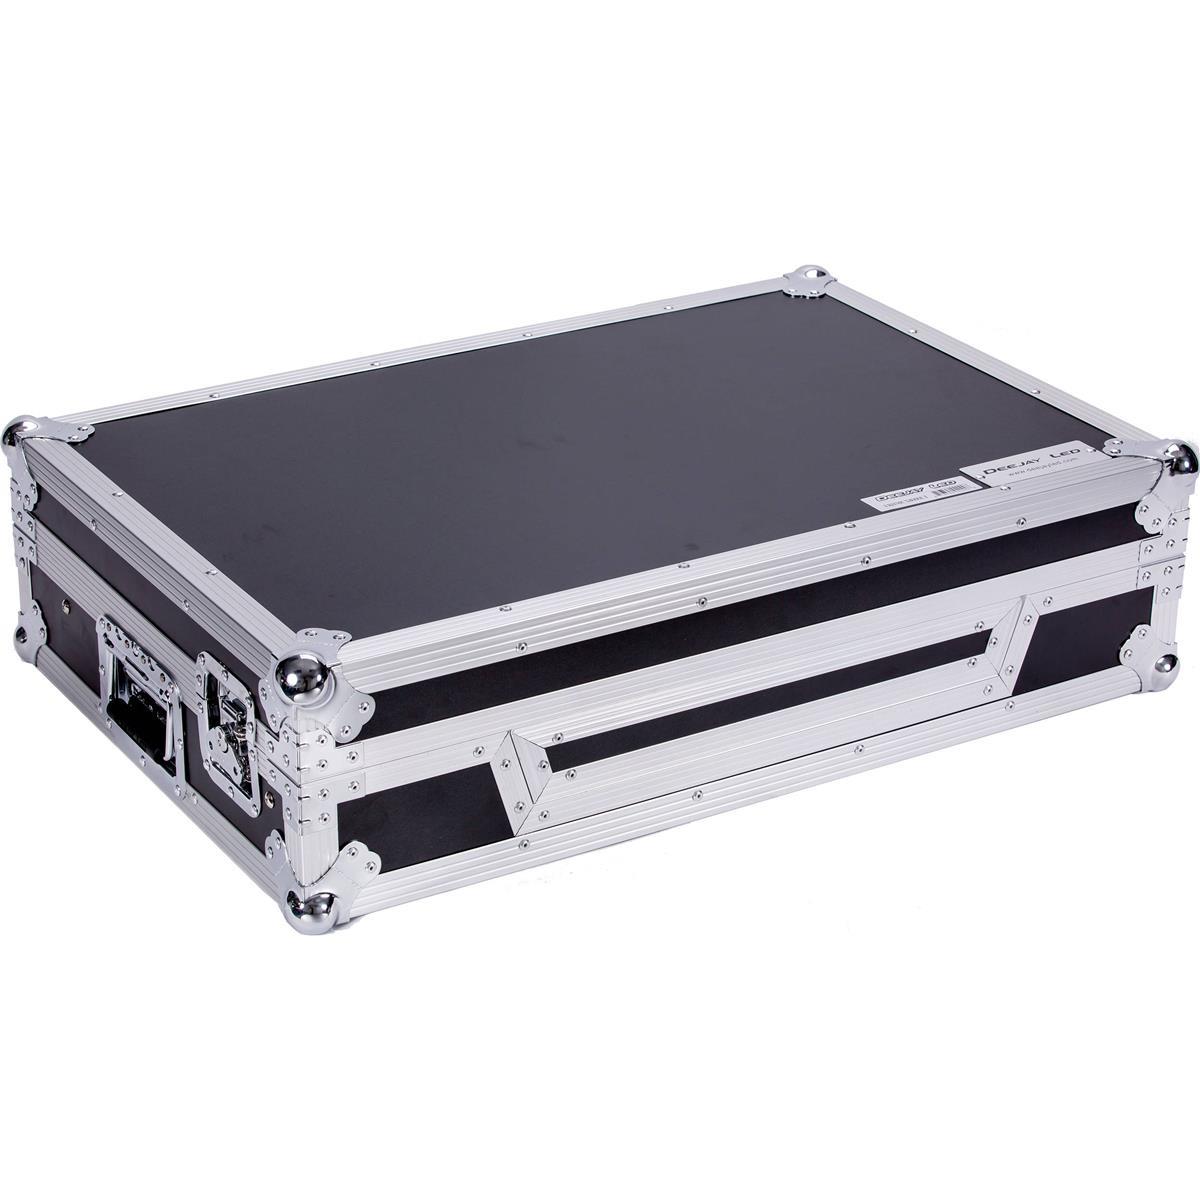 Deejay LED Fly Drive Case for MCX8000 DJ Player & DJ Controller with Laptop Shelf -  TBHMCX8000LT